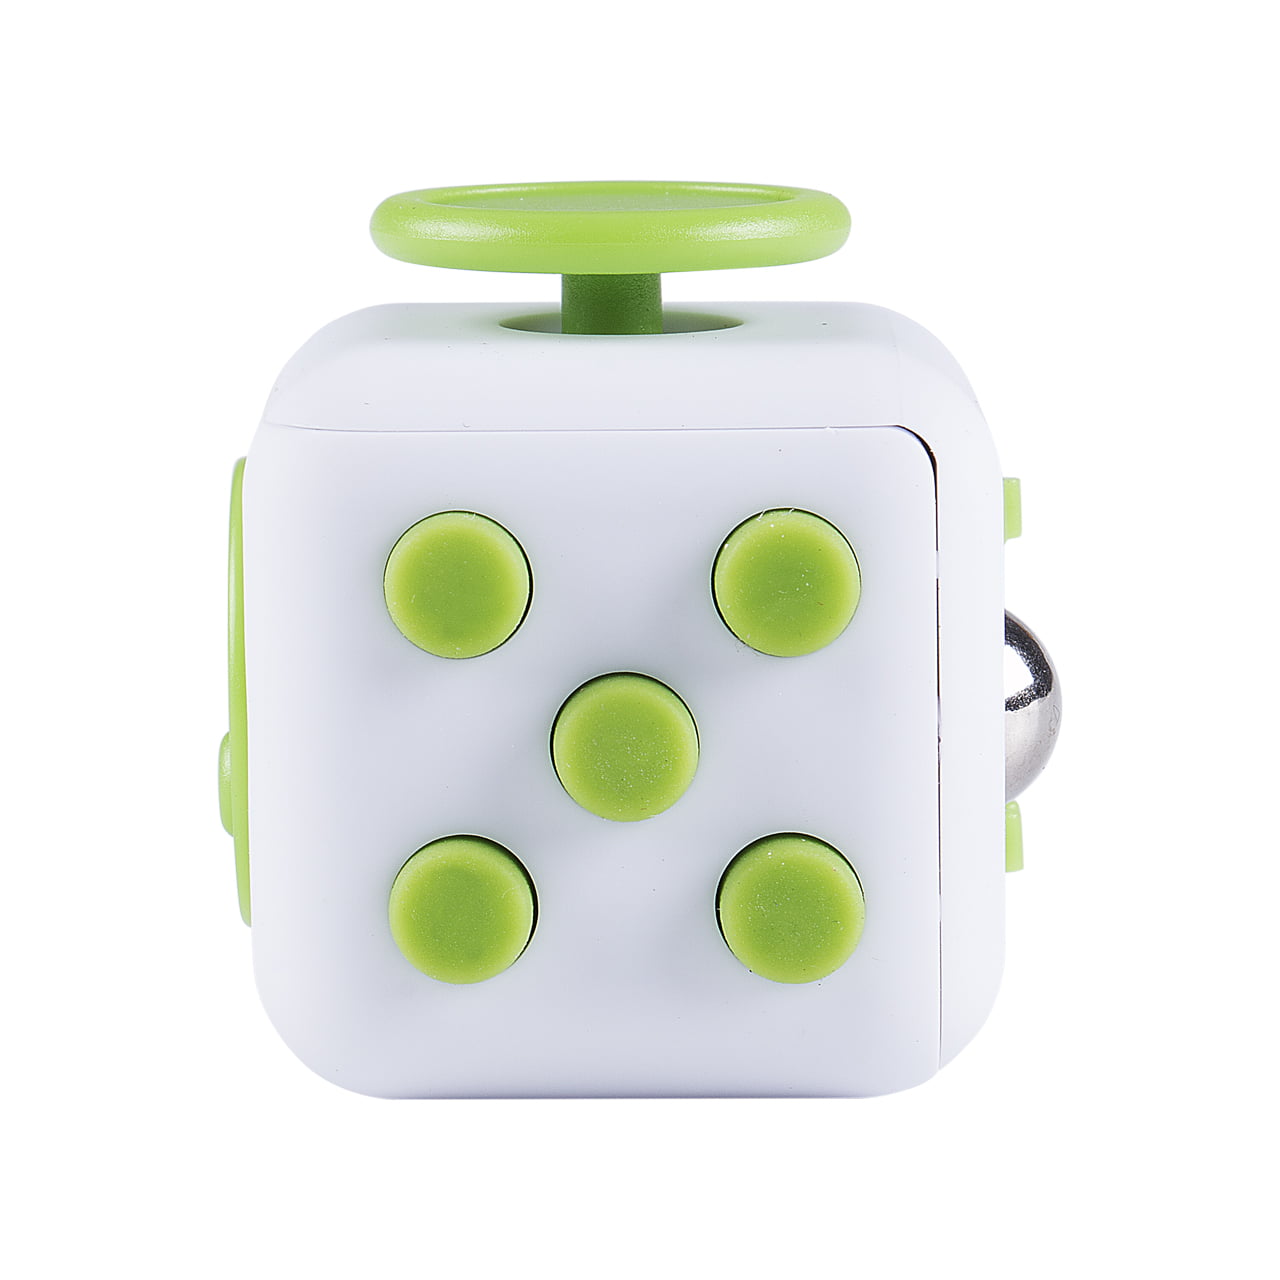 *Restocked* New Fidget Cube Desk Toy Stress Anxiety Relief Focus Tool *LOWEST* 